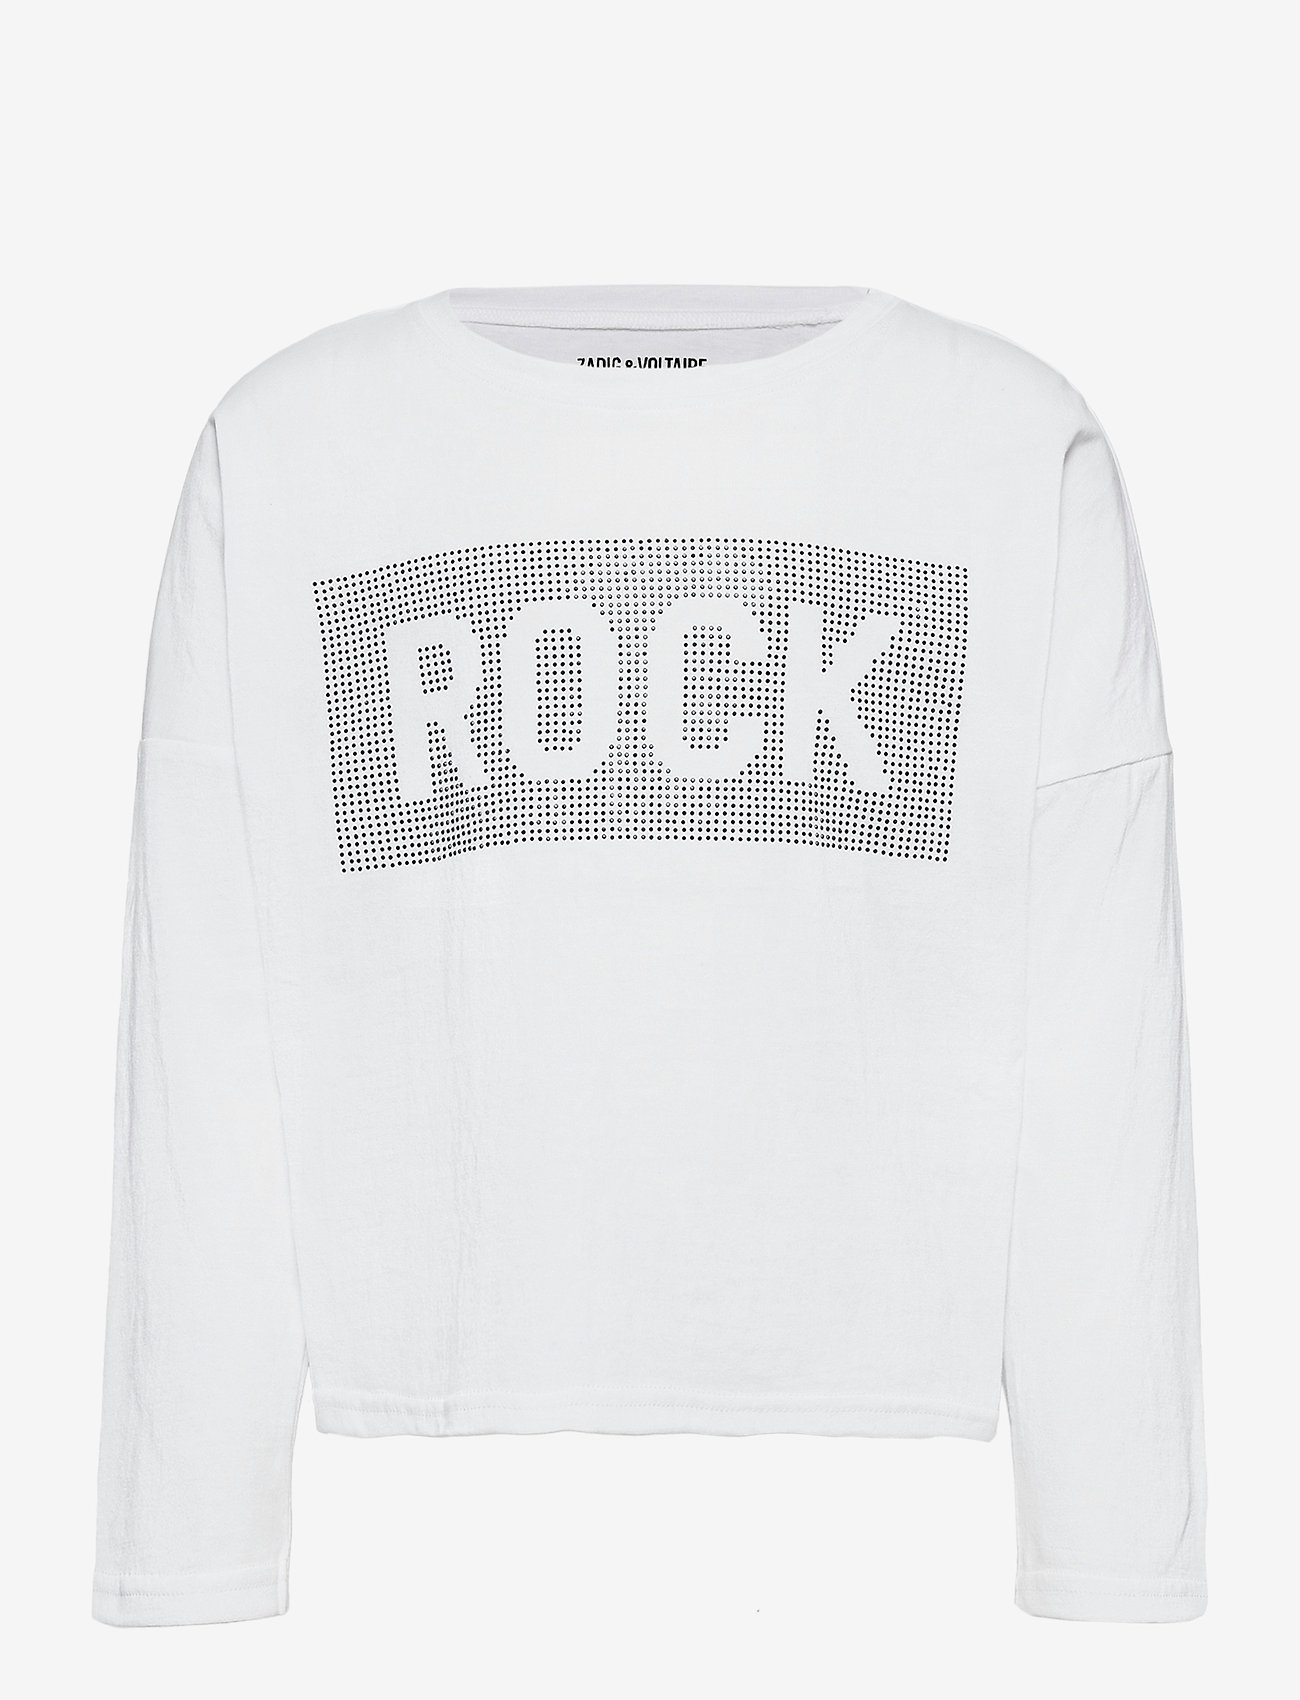 Zadig & Voltaire Kids - LONG SLEEVE T-SHIRT - white - 0